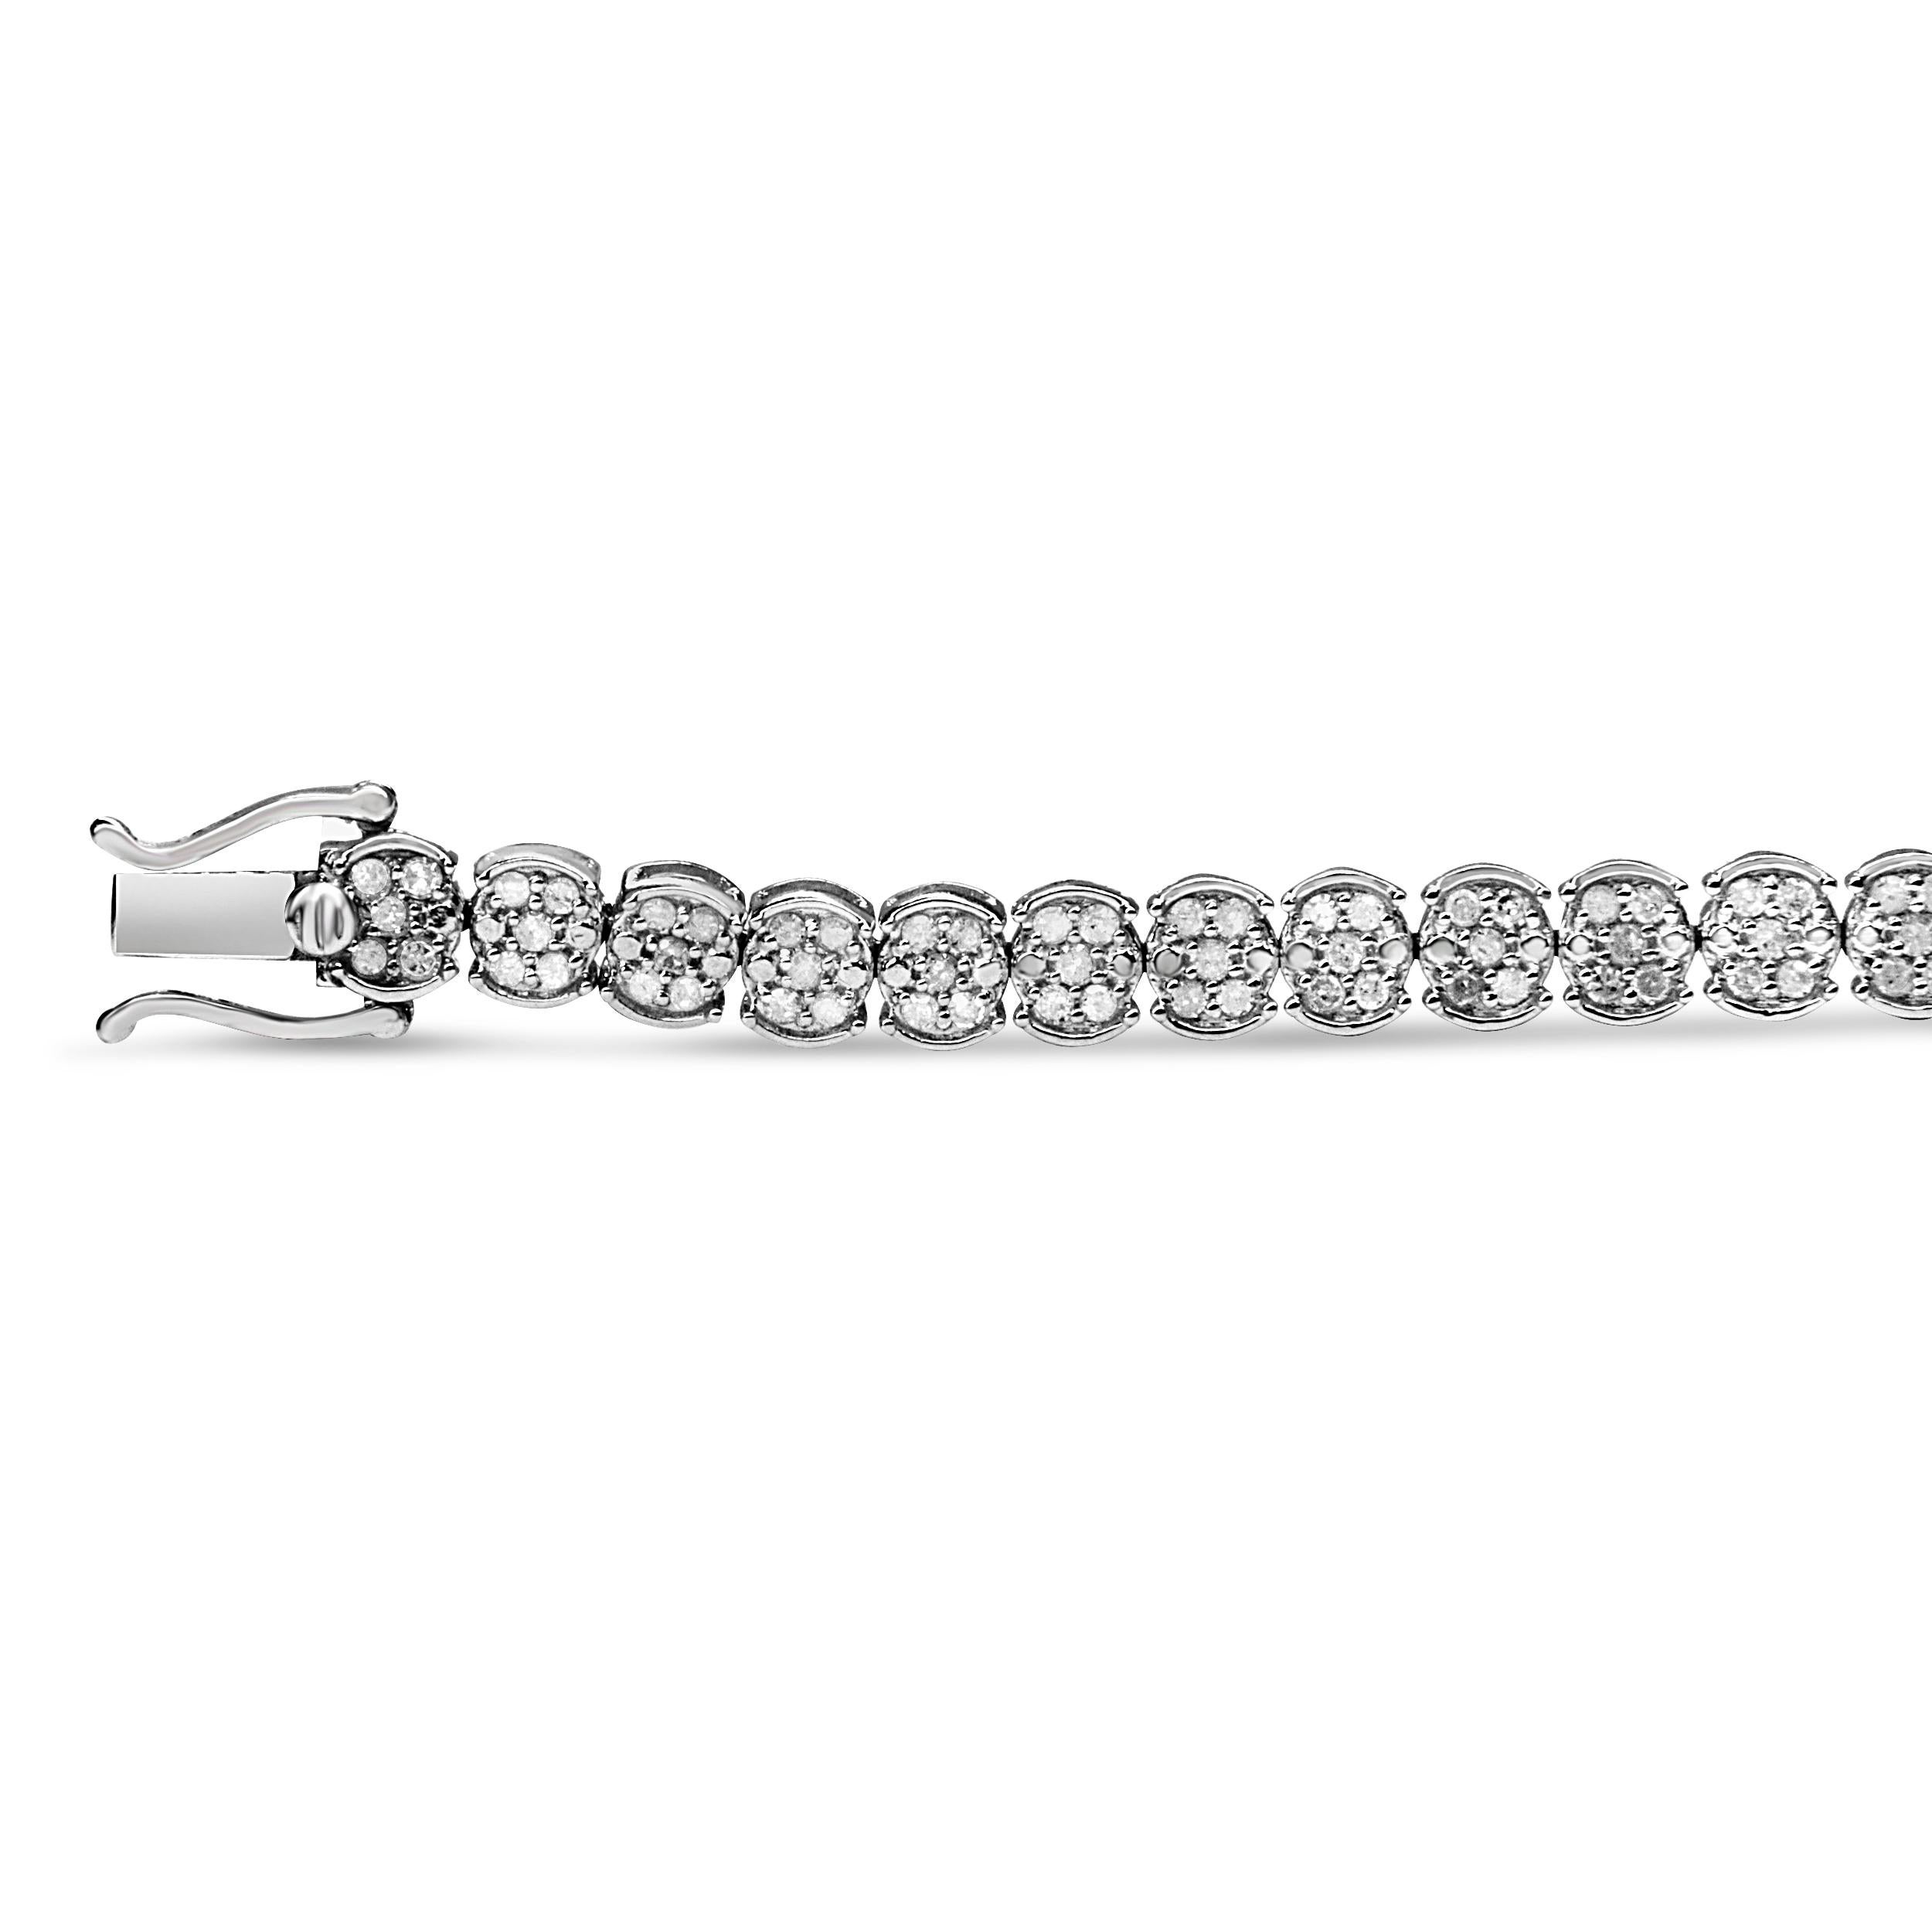 A sparkling enchantment of diamonds creates glistening beauty in this cluster link bracelet. This bracelet radiates modern glamour, perfectly prepared with round diamonds in a prong setting, wrapped in fine .925 sterling silver. The bracelet is